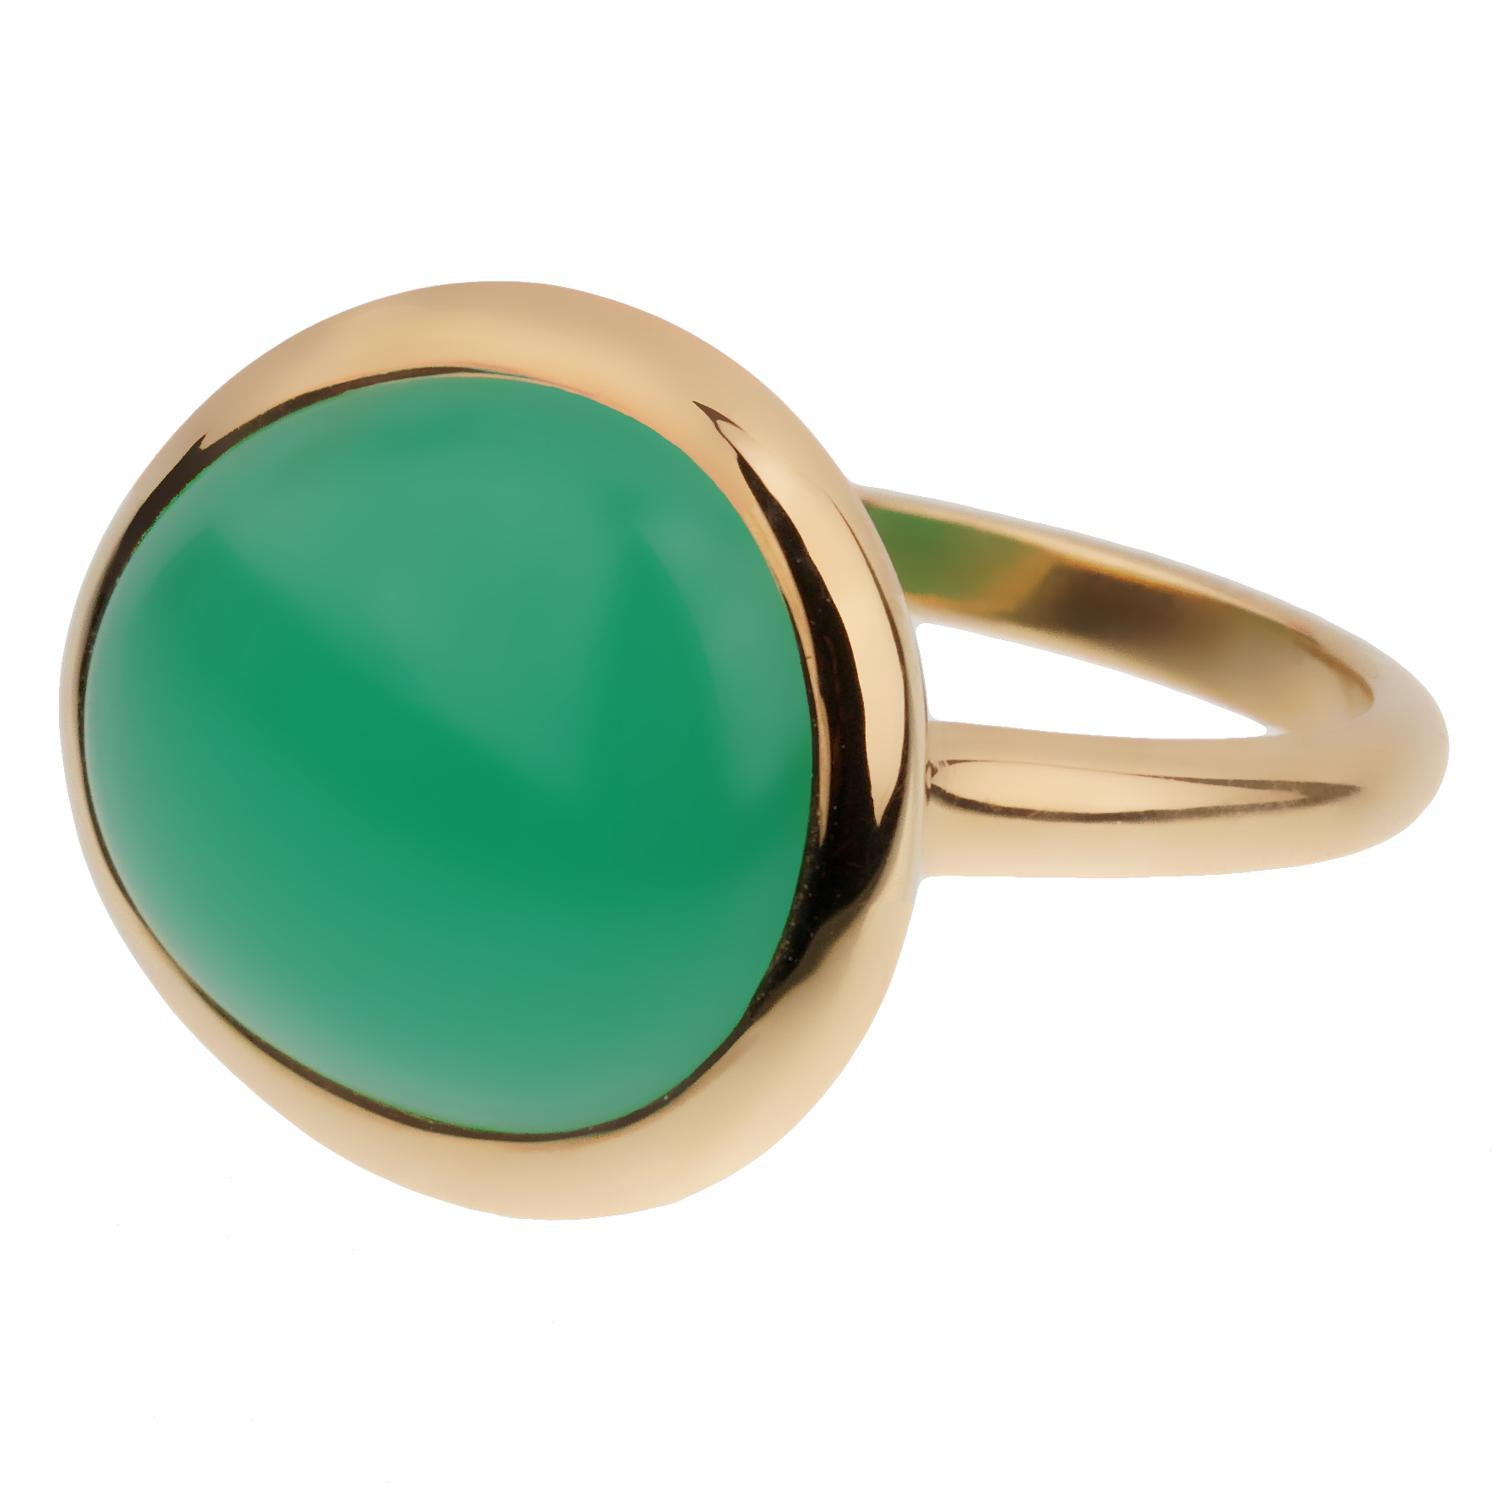 A chic Fred of Paris yellow gold cocktail ring showcasing a 7ct cabochon Chrysophase set in 18k gold. The ring measures a size 7 1/2 and can be resized if needed.